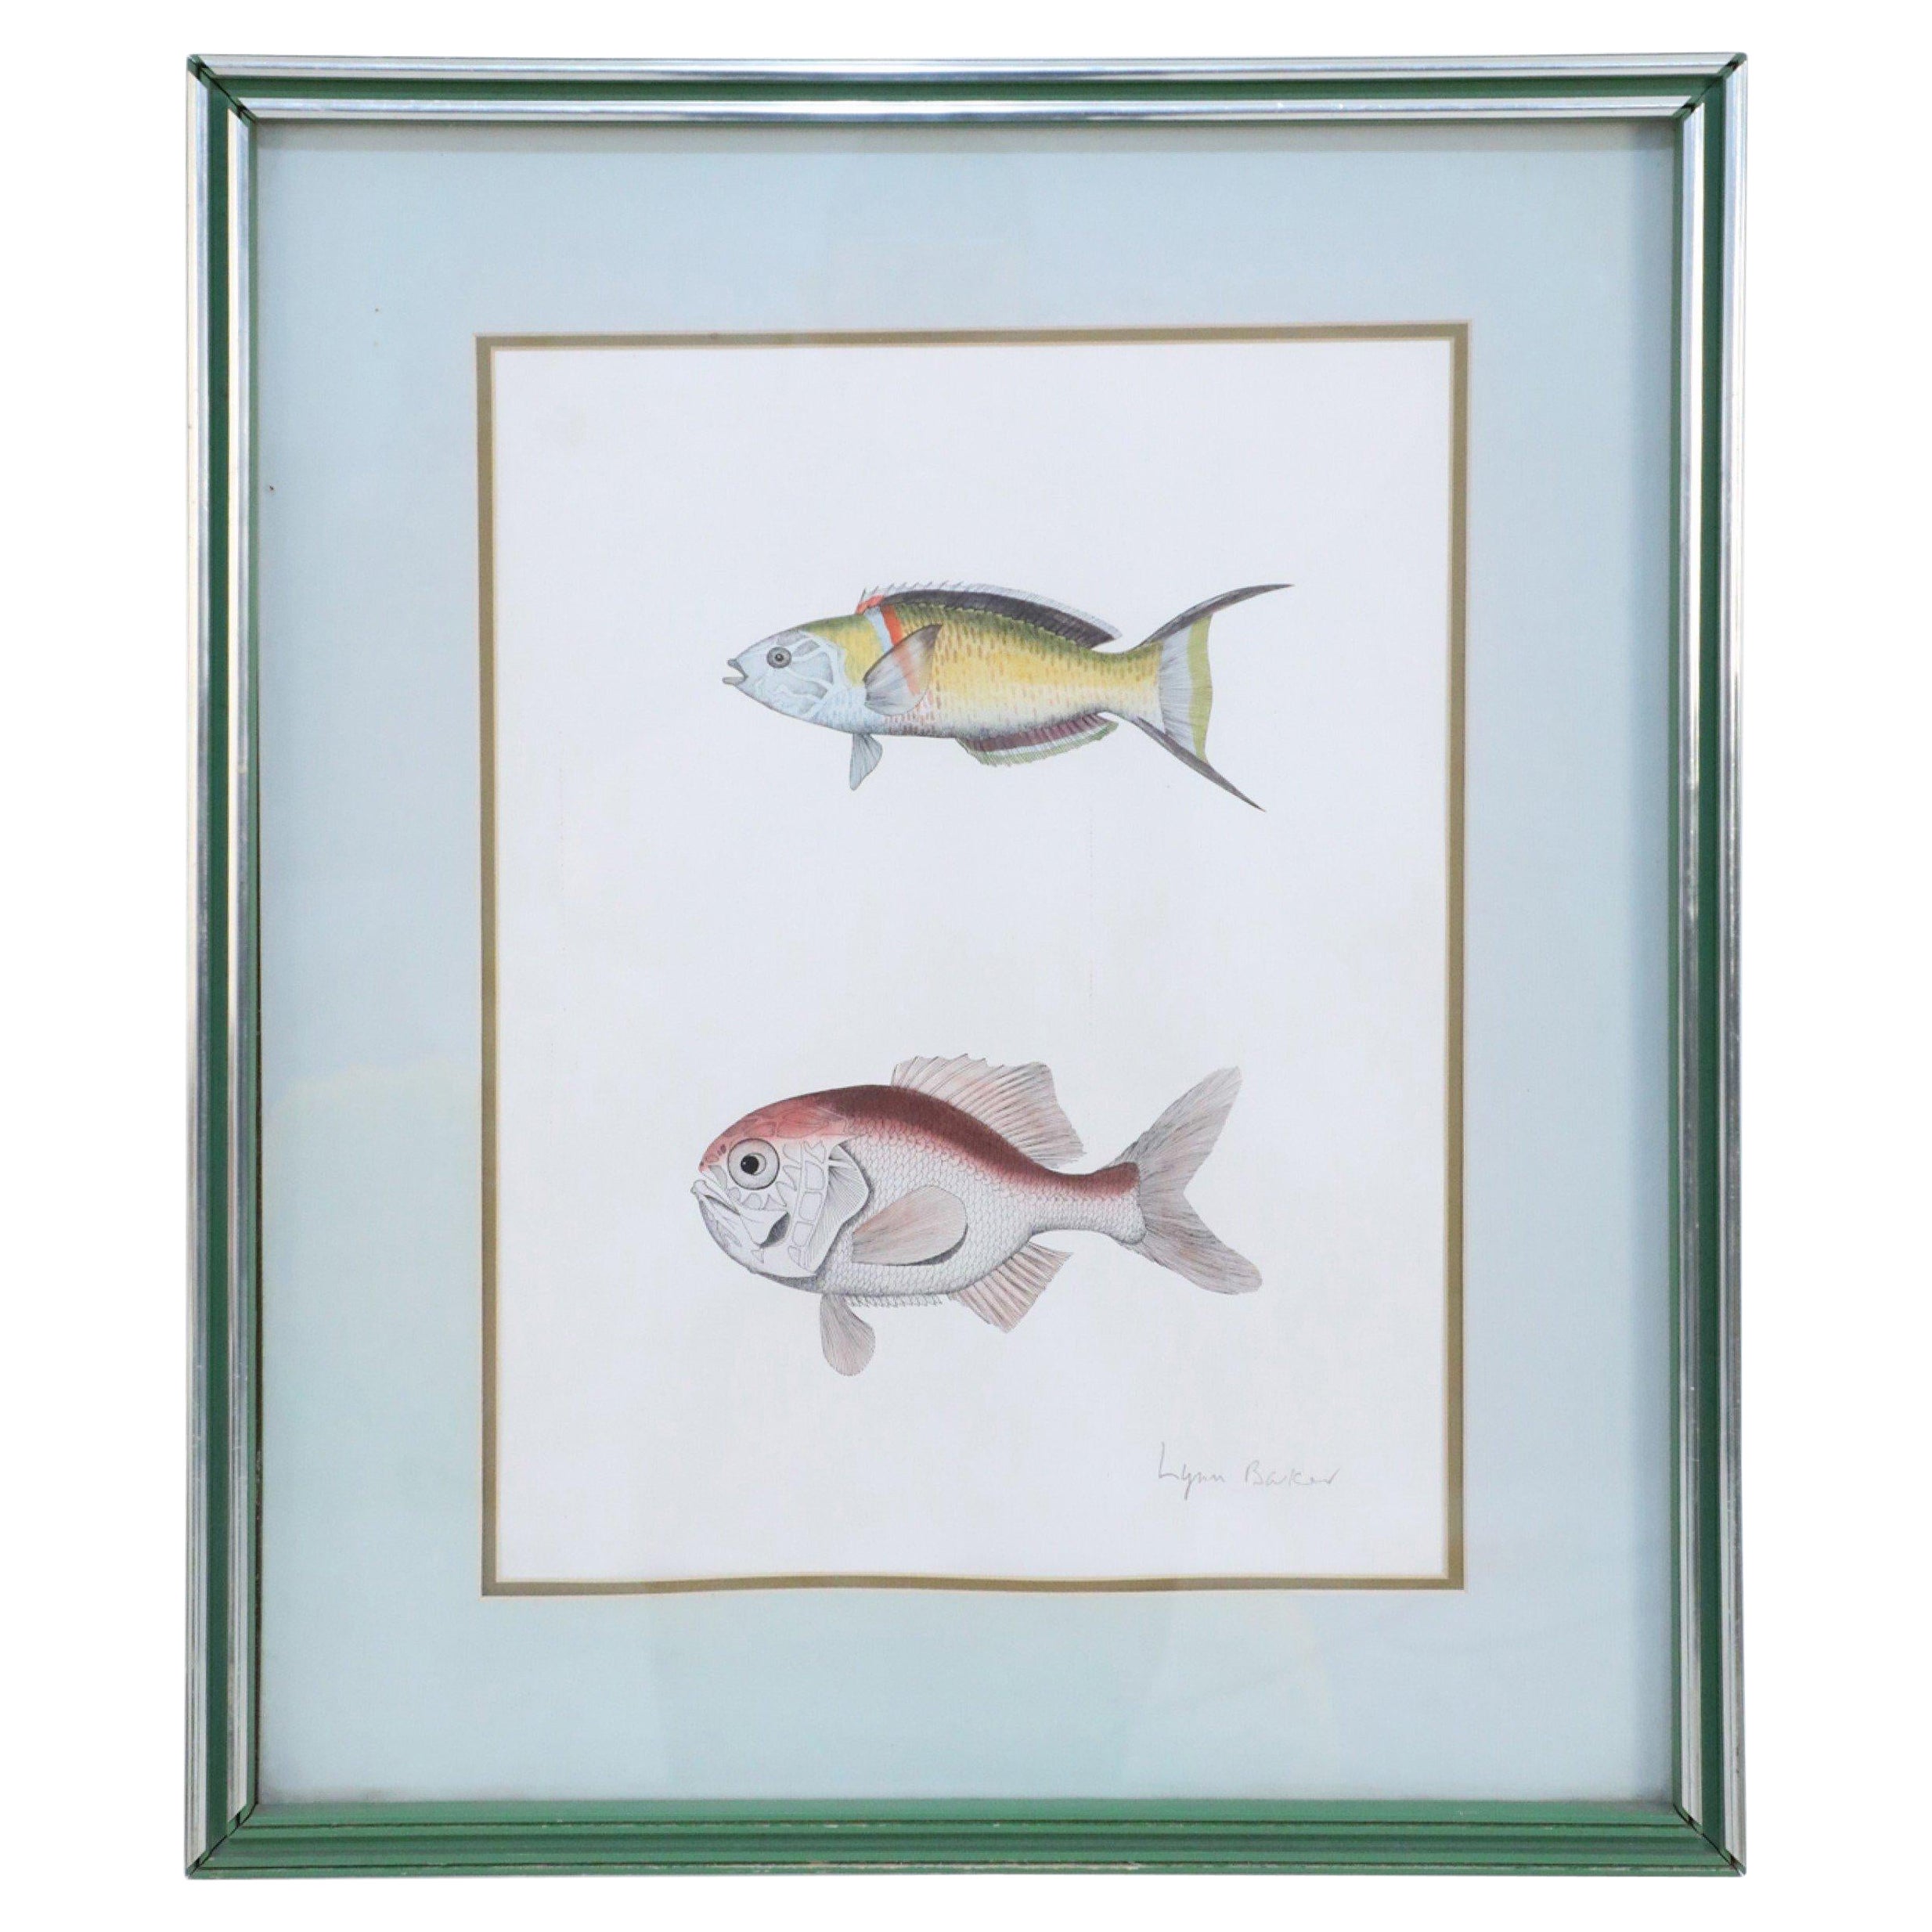 Framed Lithograph of Two Multi-Colored Tropical Fish